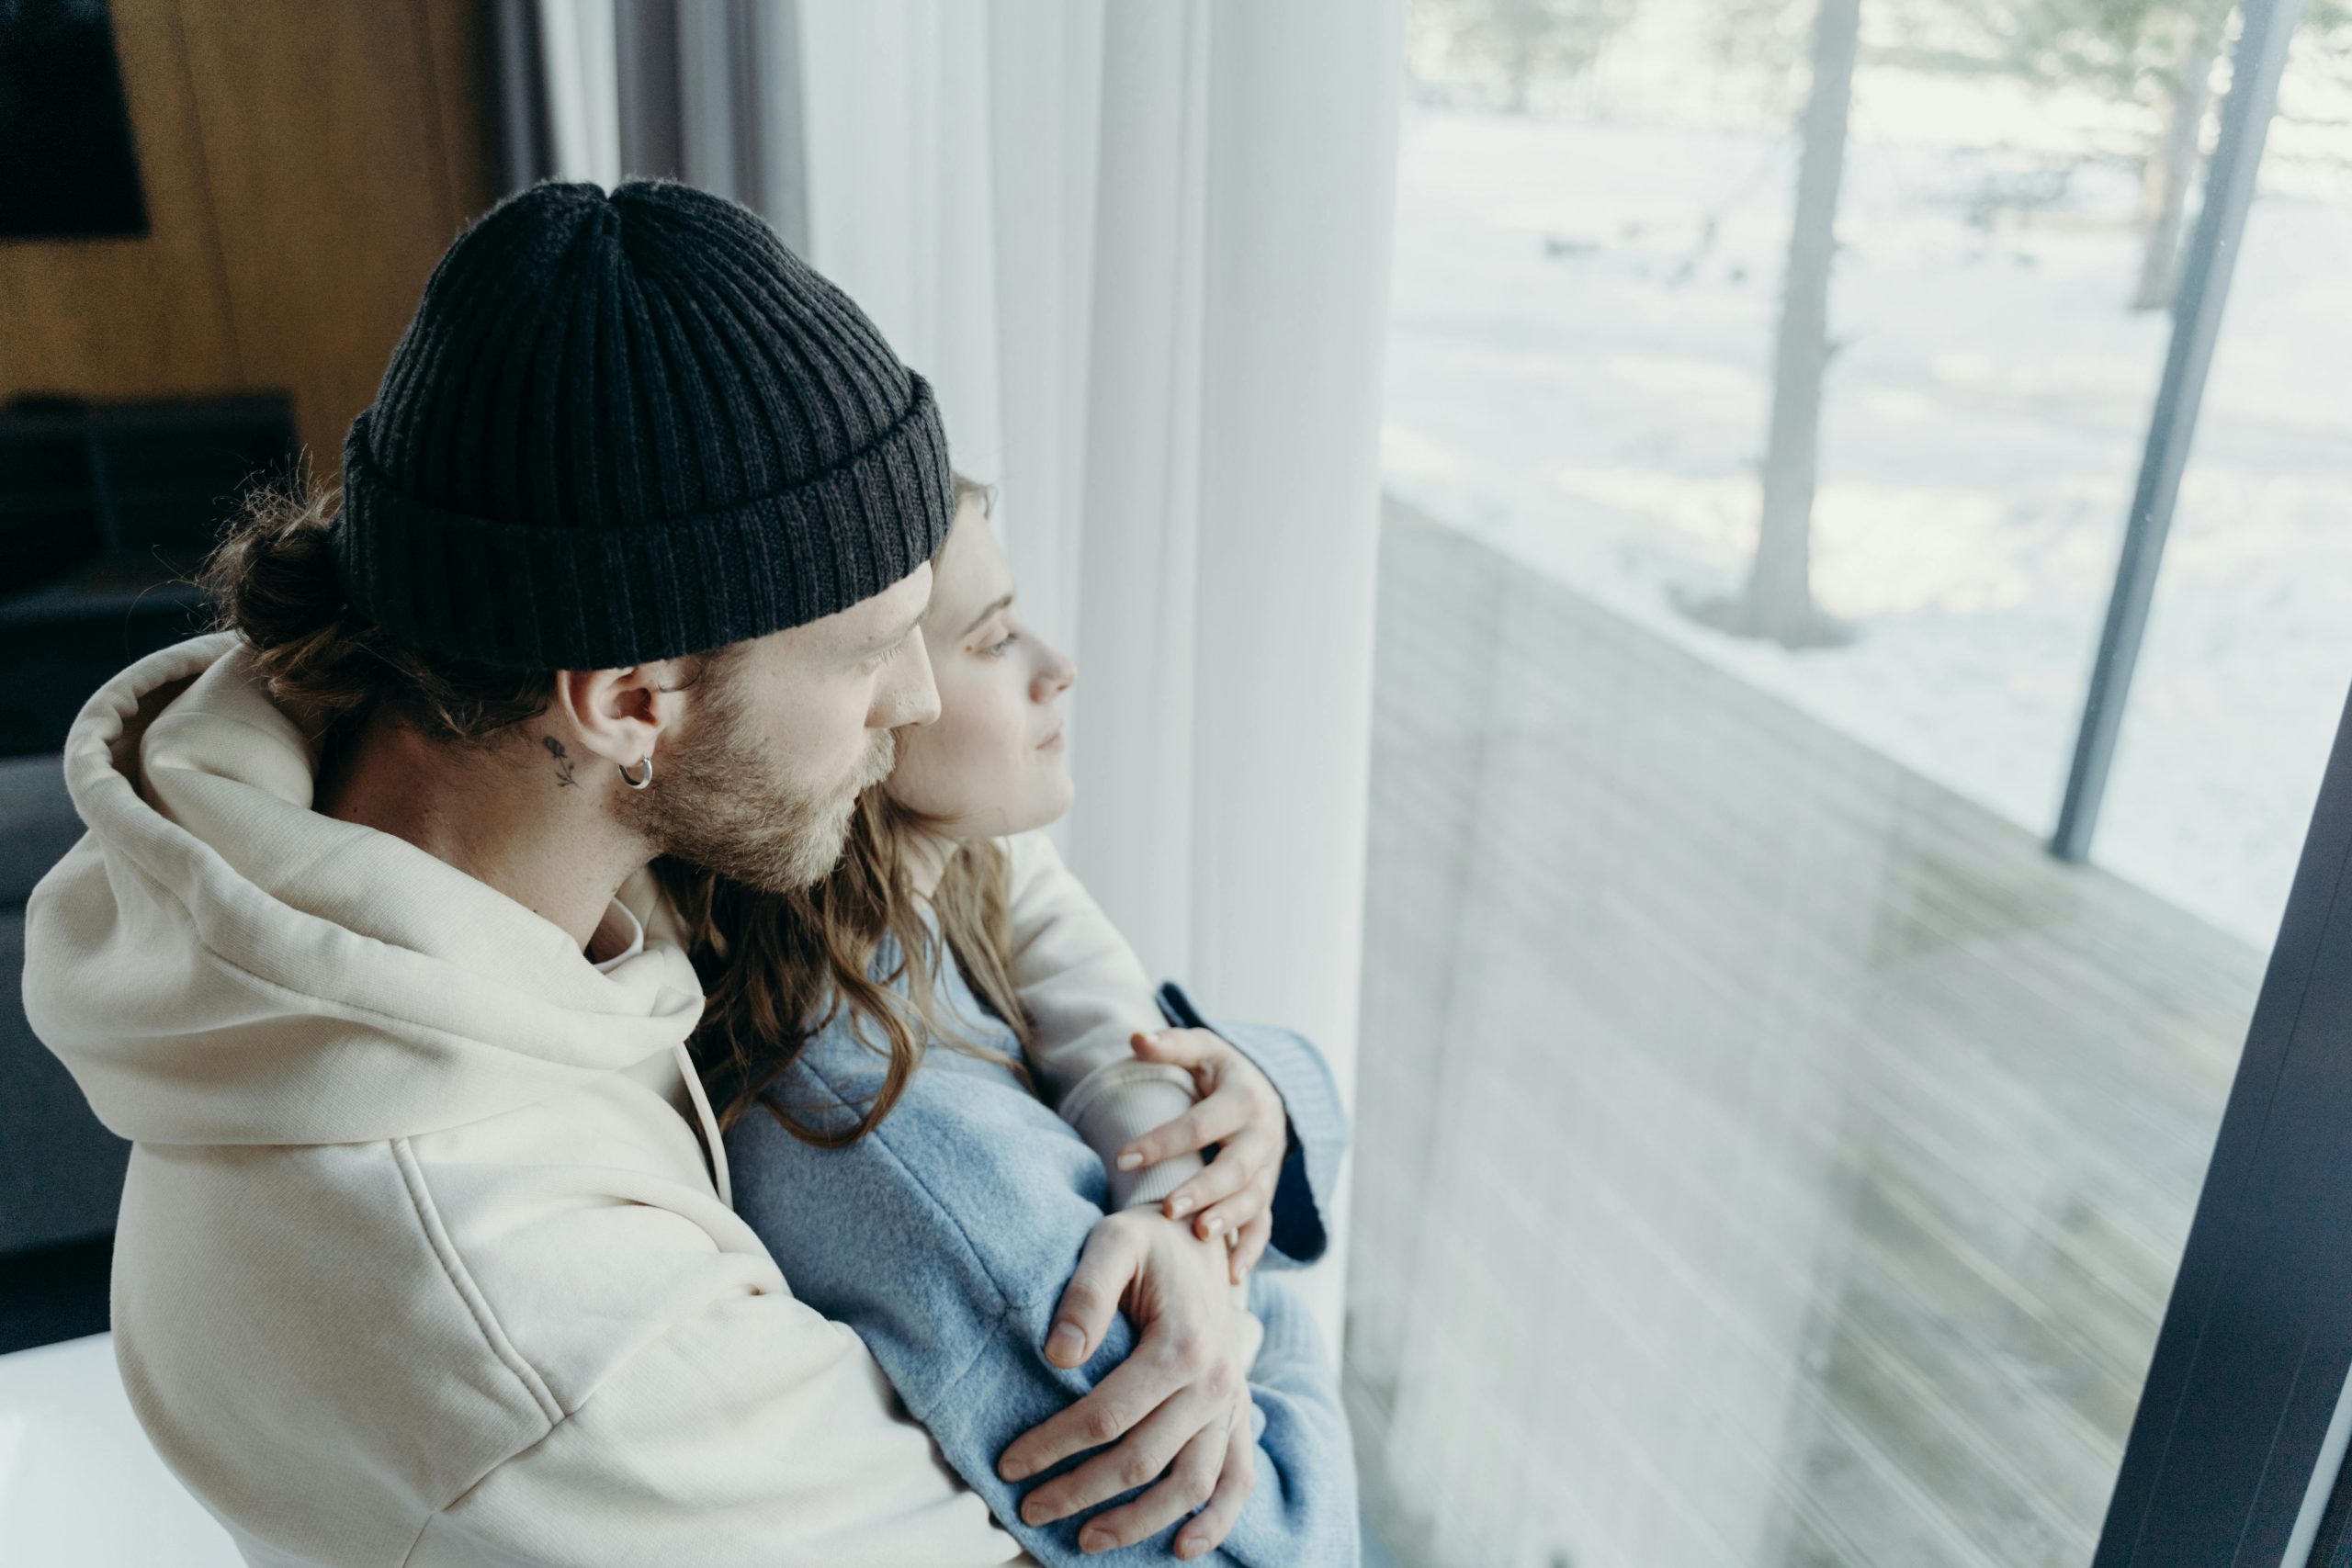 Two people standing looking out window in embrace